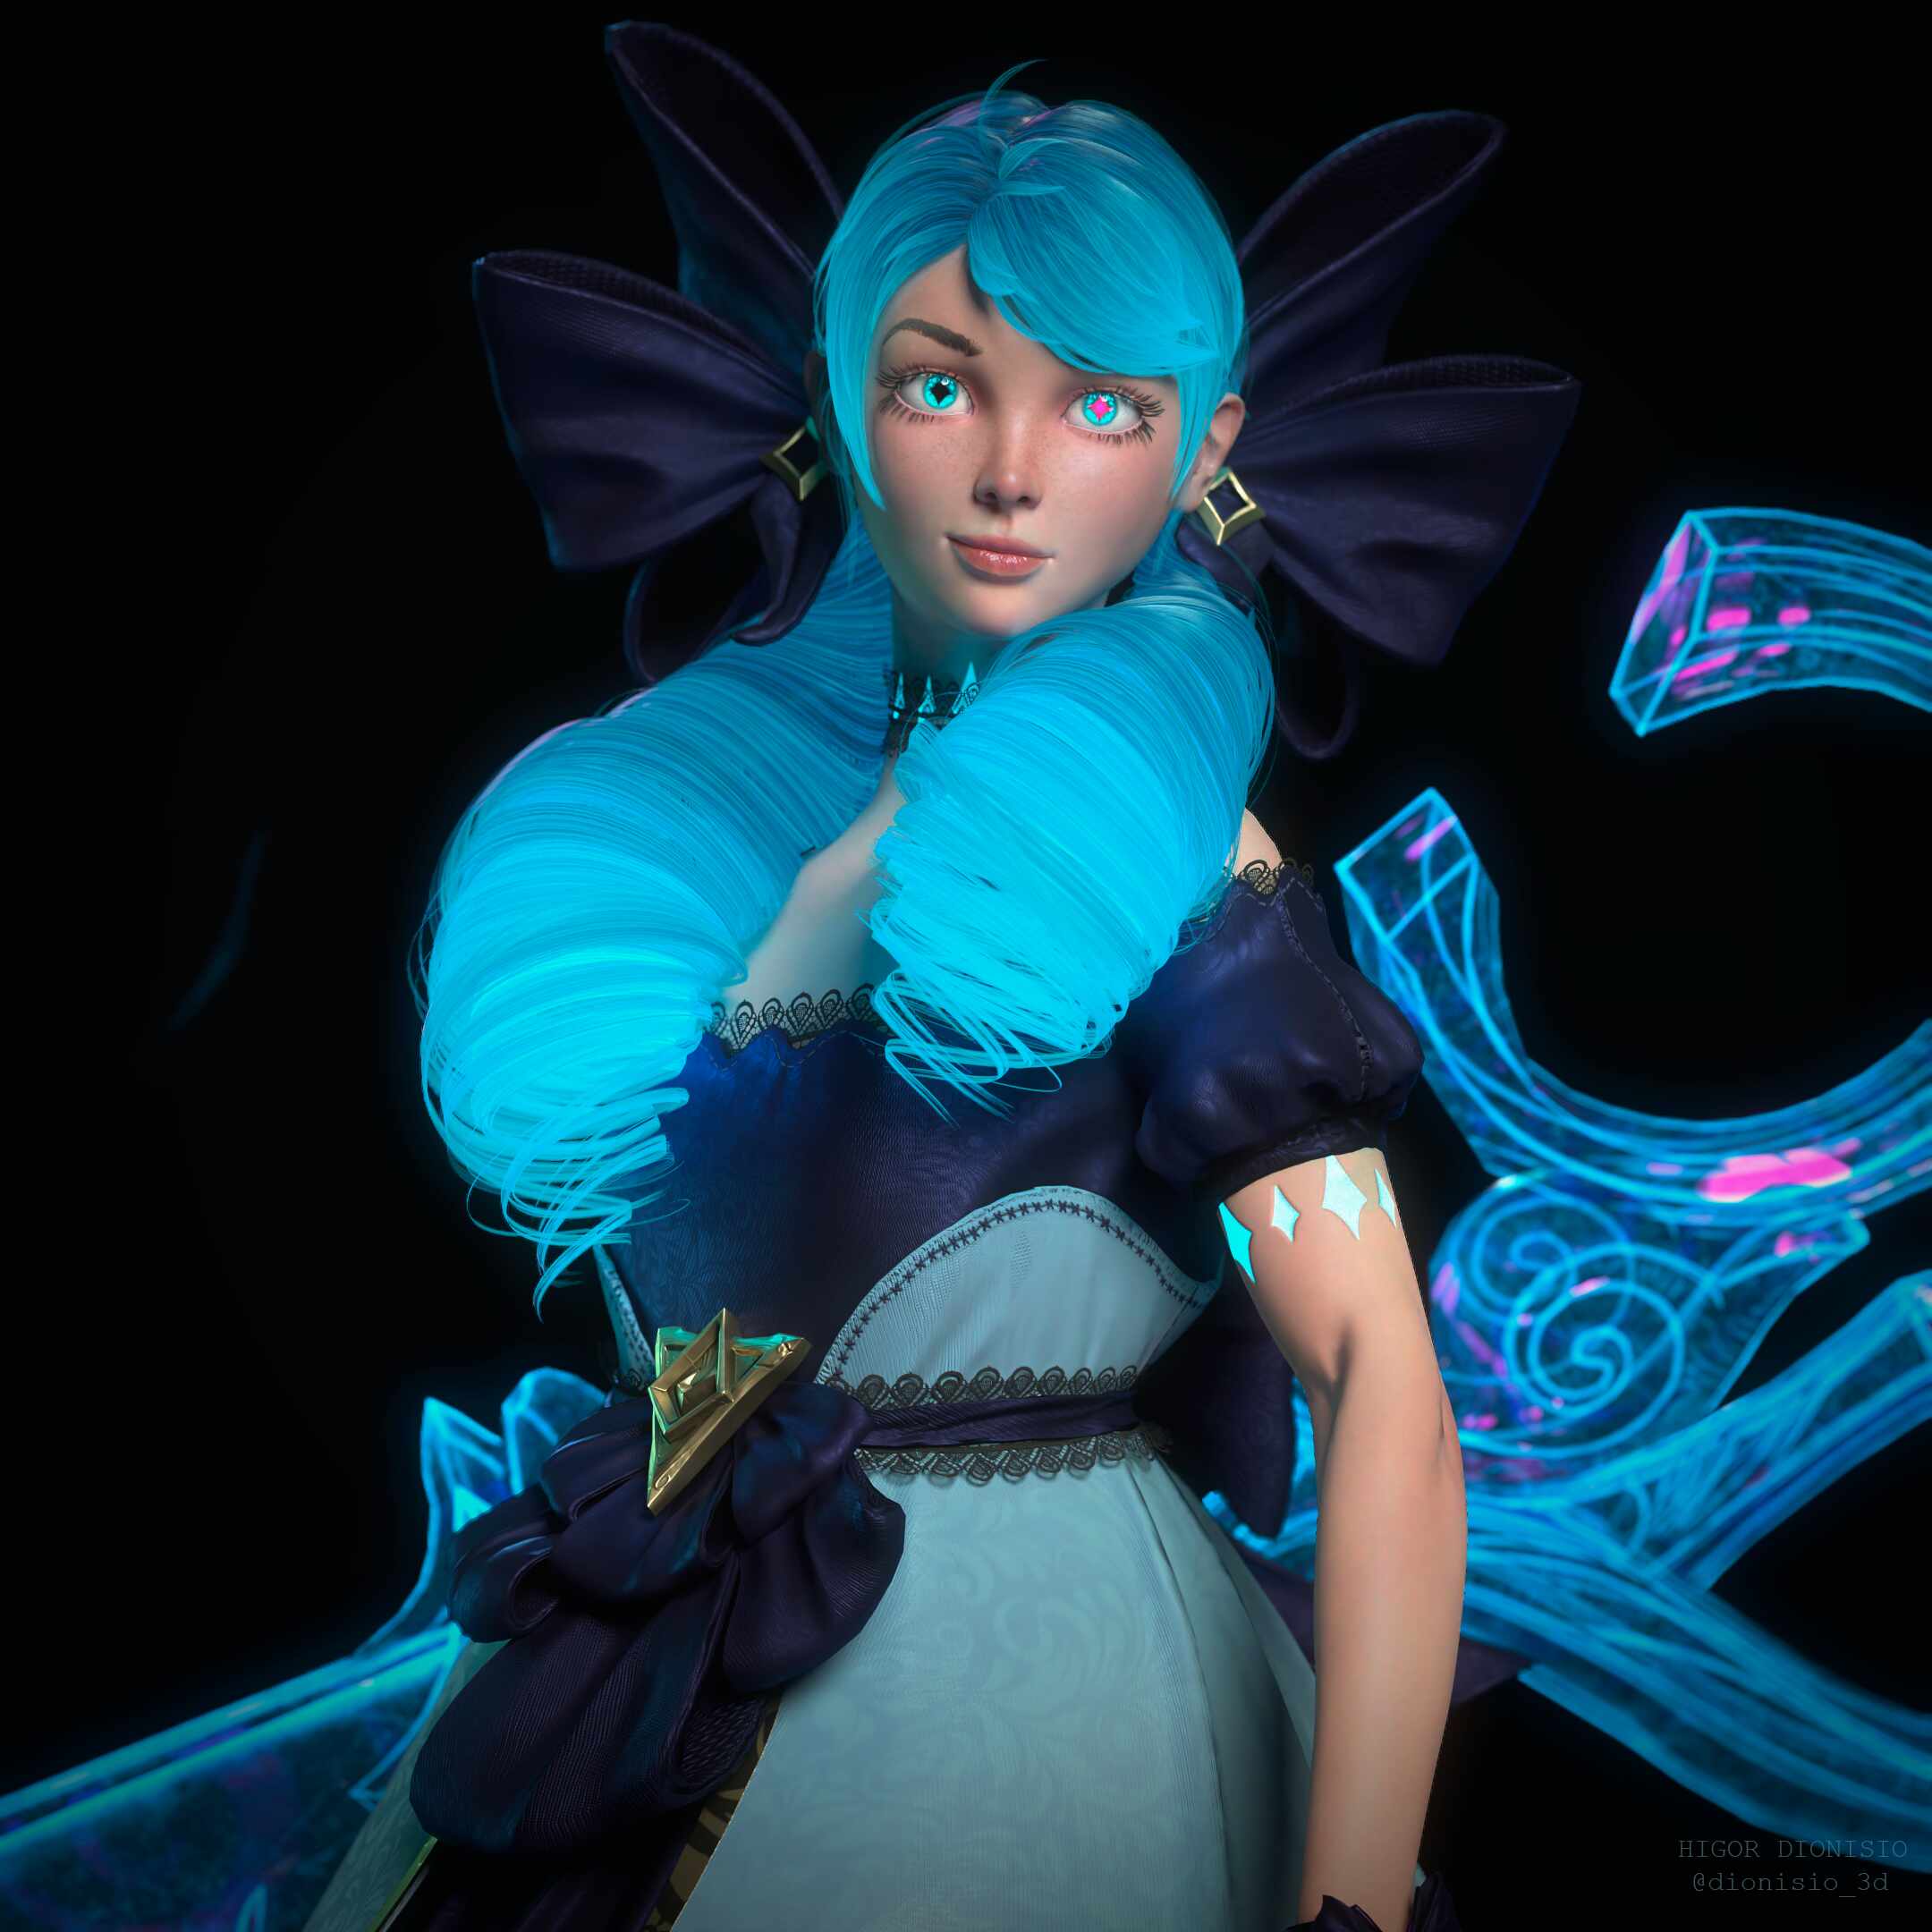 Gwen, The Hallowed Seamstress - League of Legends